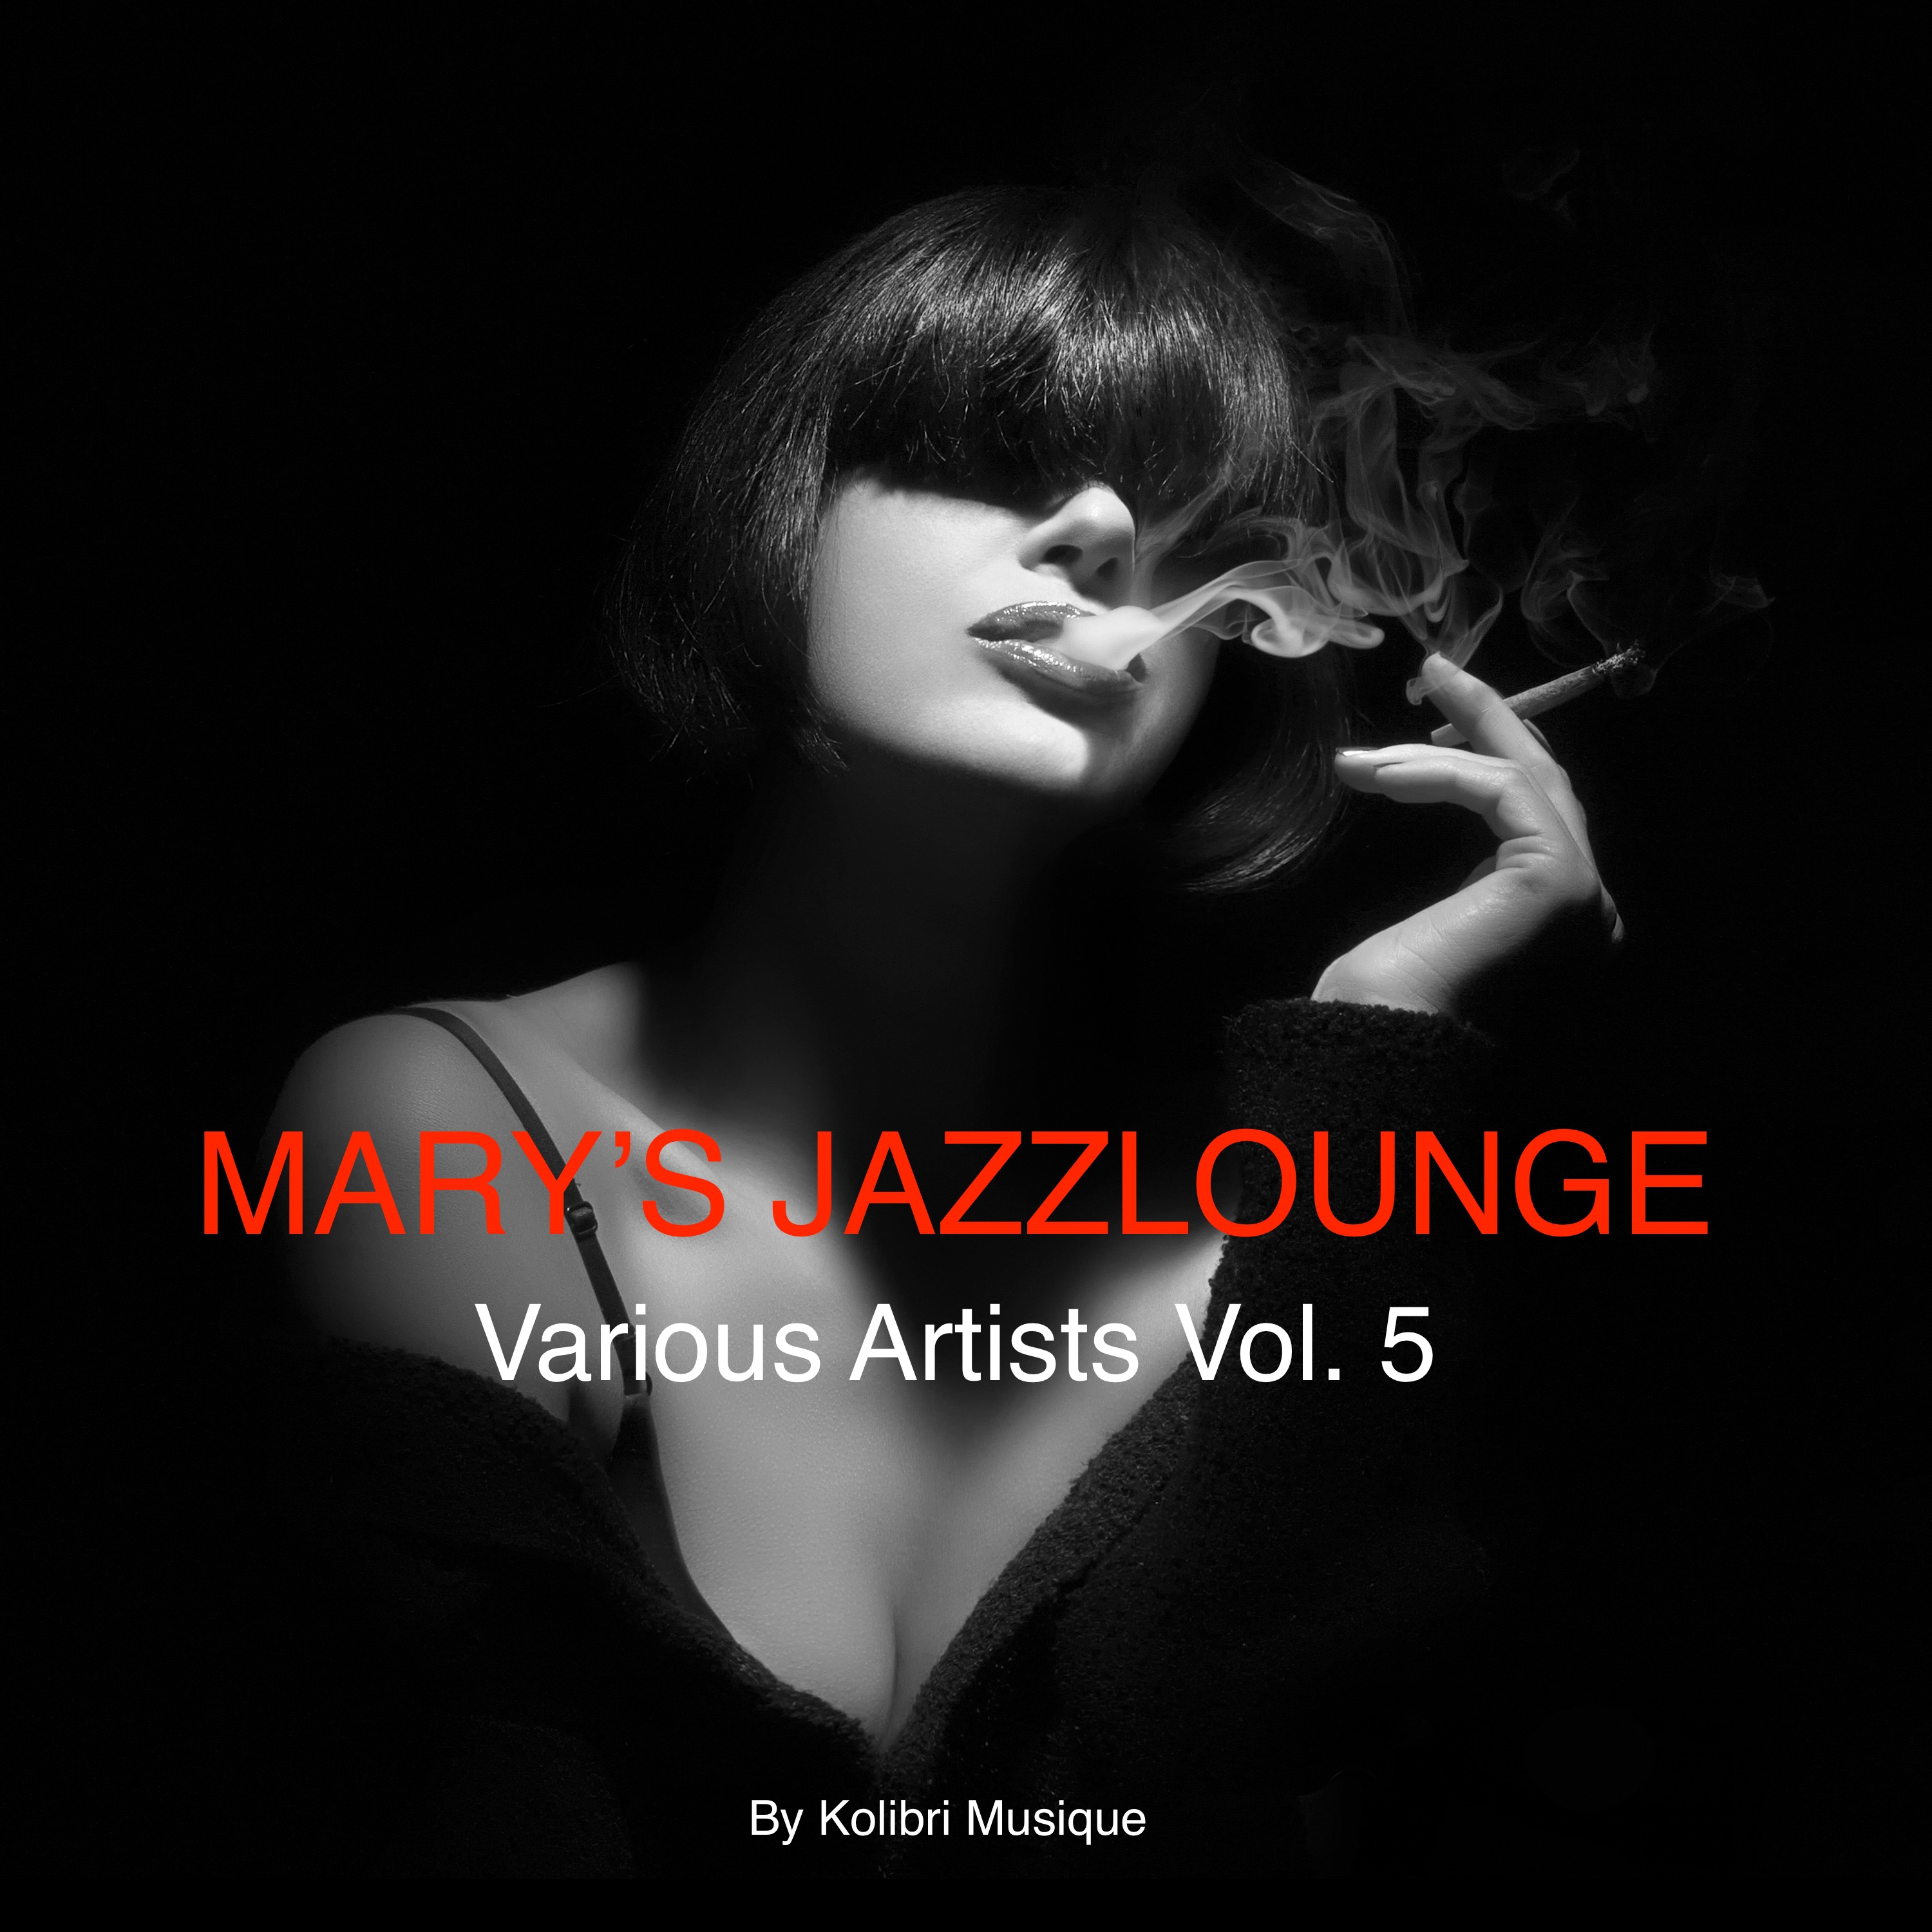 I've Got the Music in Me (DJ Fopp Jazzy Mix) [Feat. Manuelle]